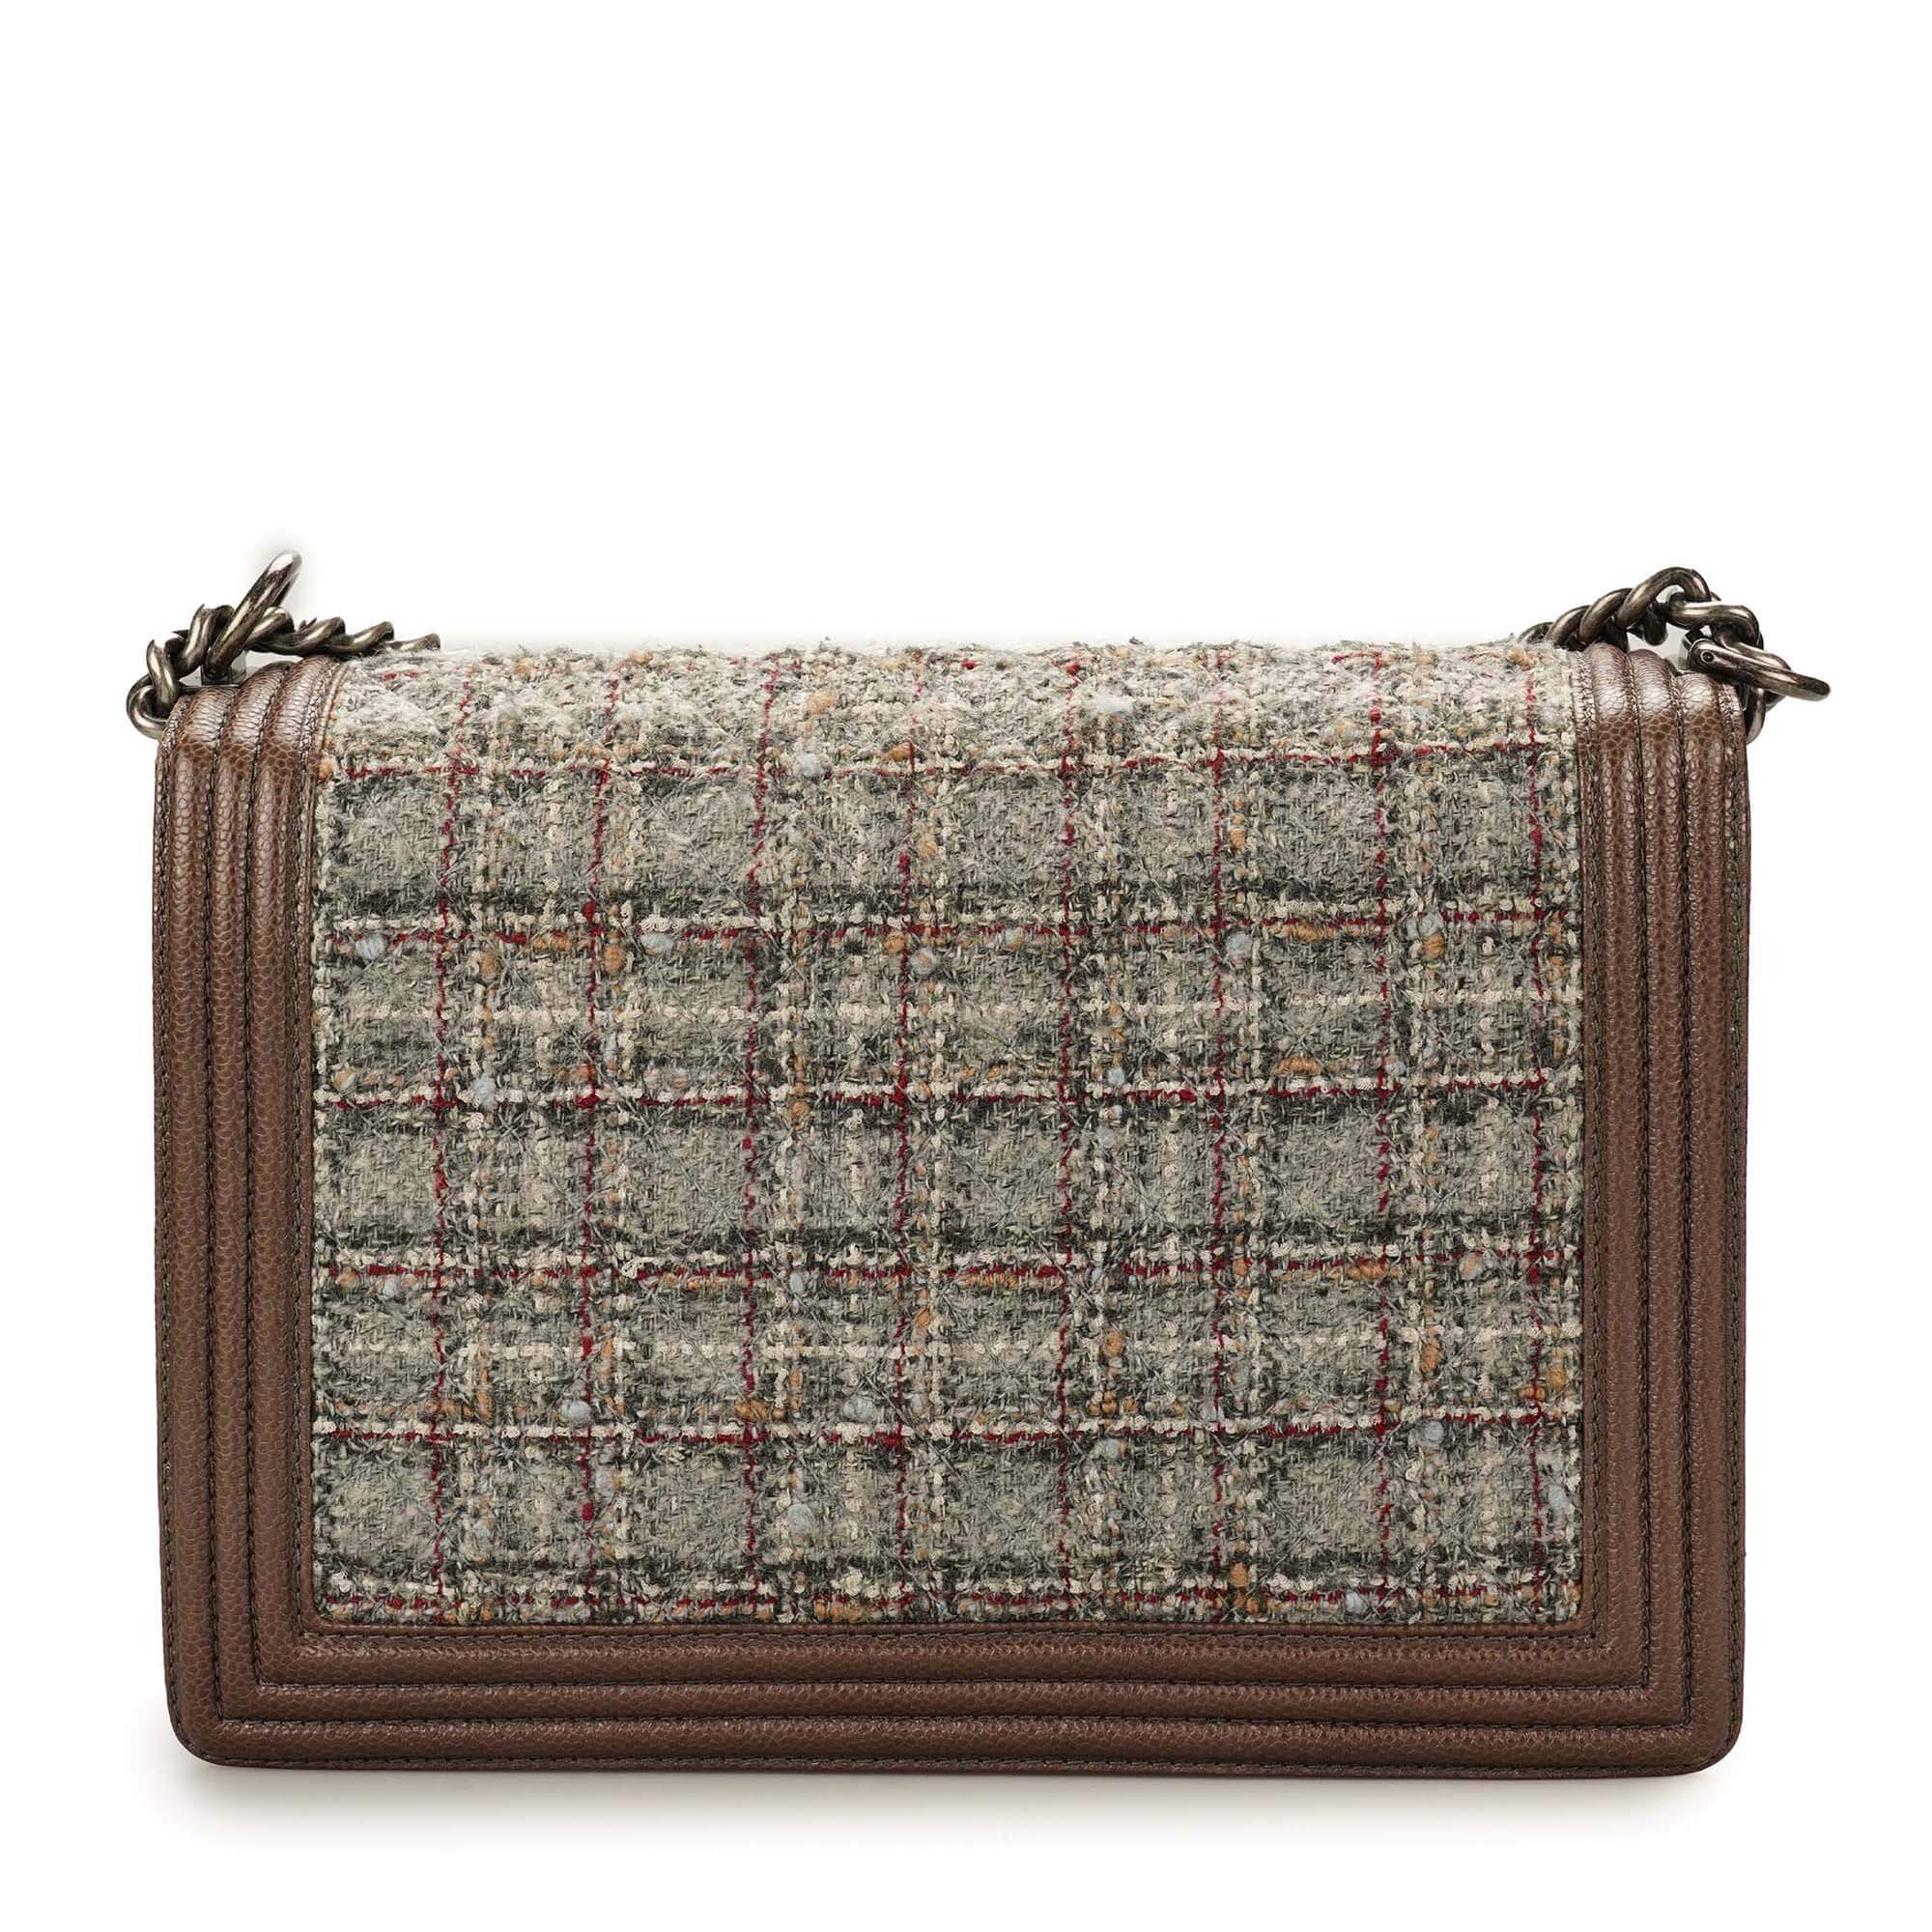 Chanel - Brown Leather and Tweed Large Boy Bag